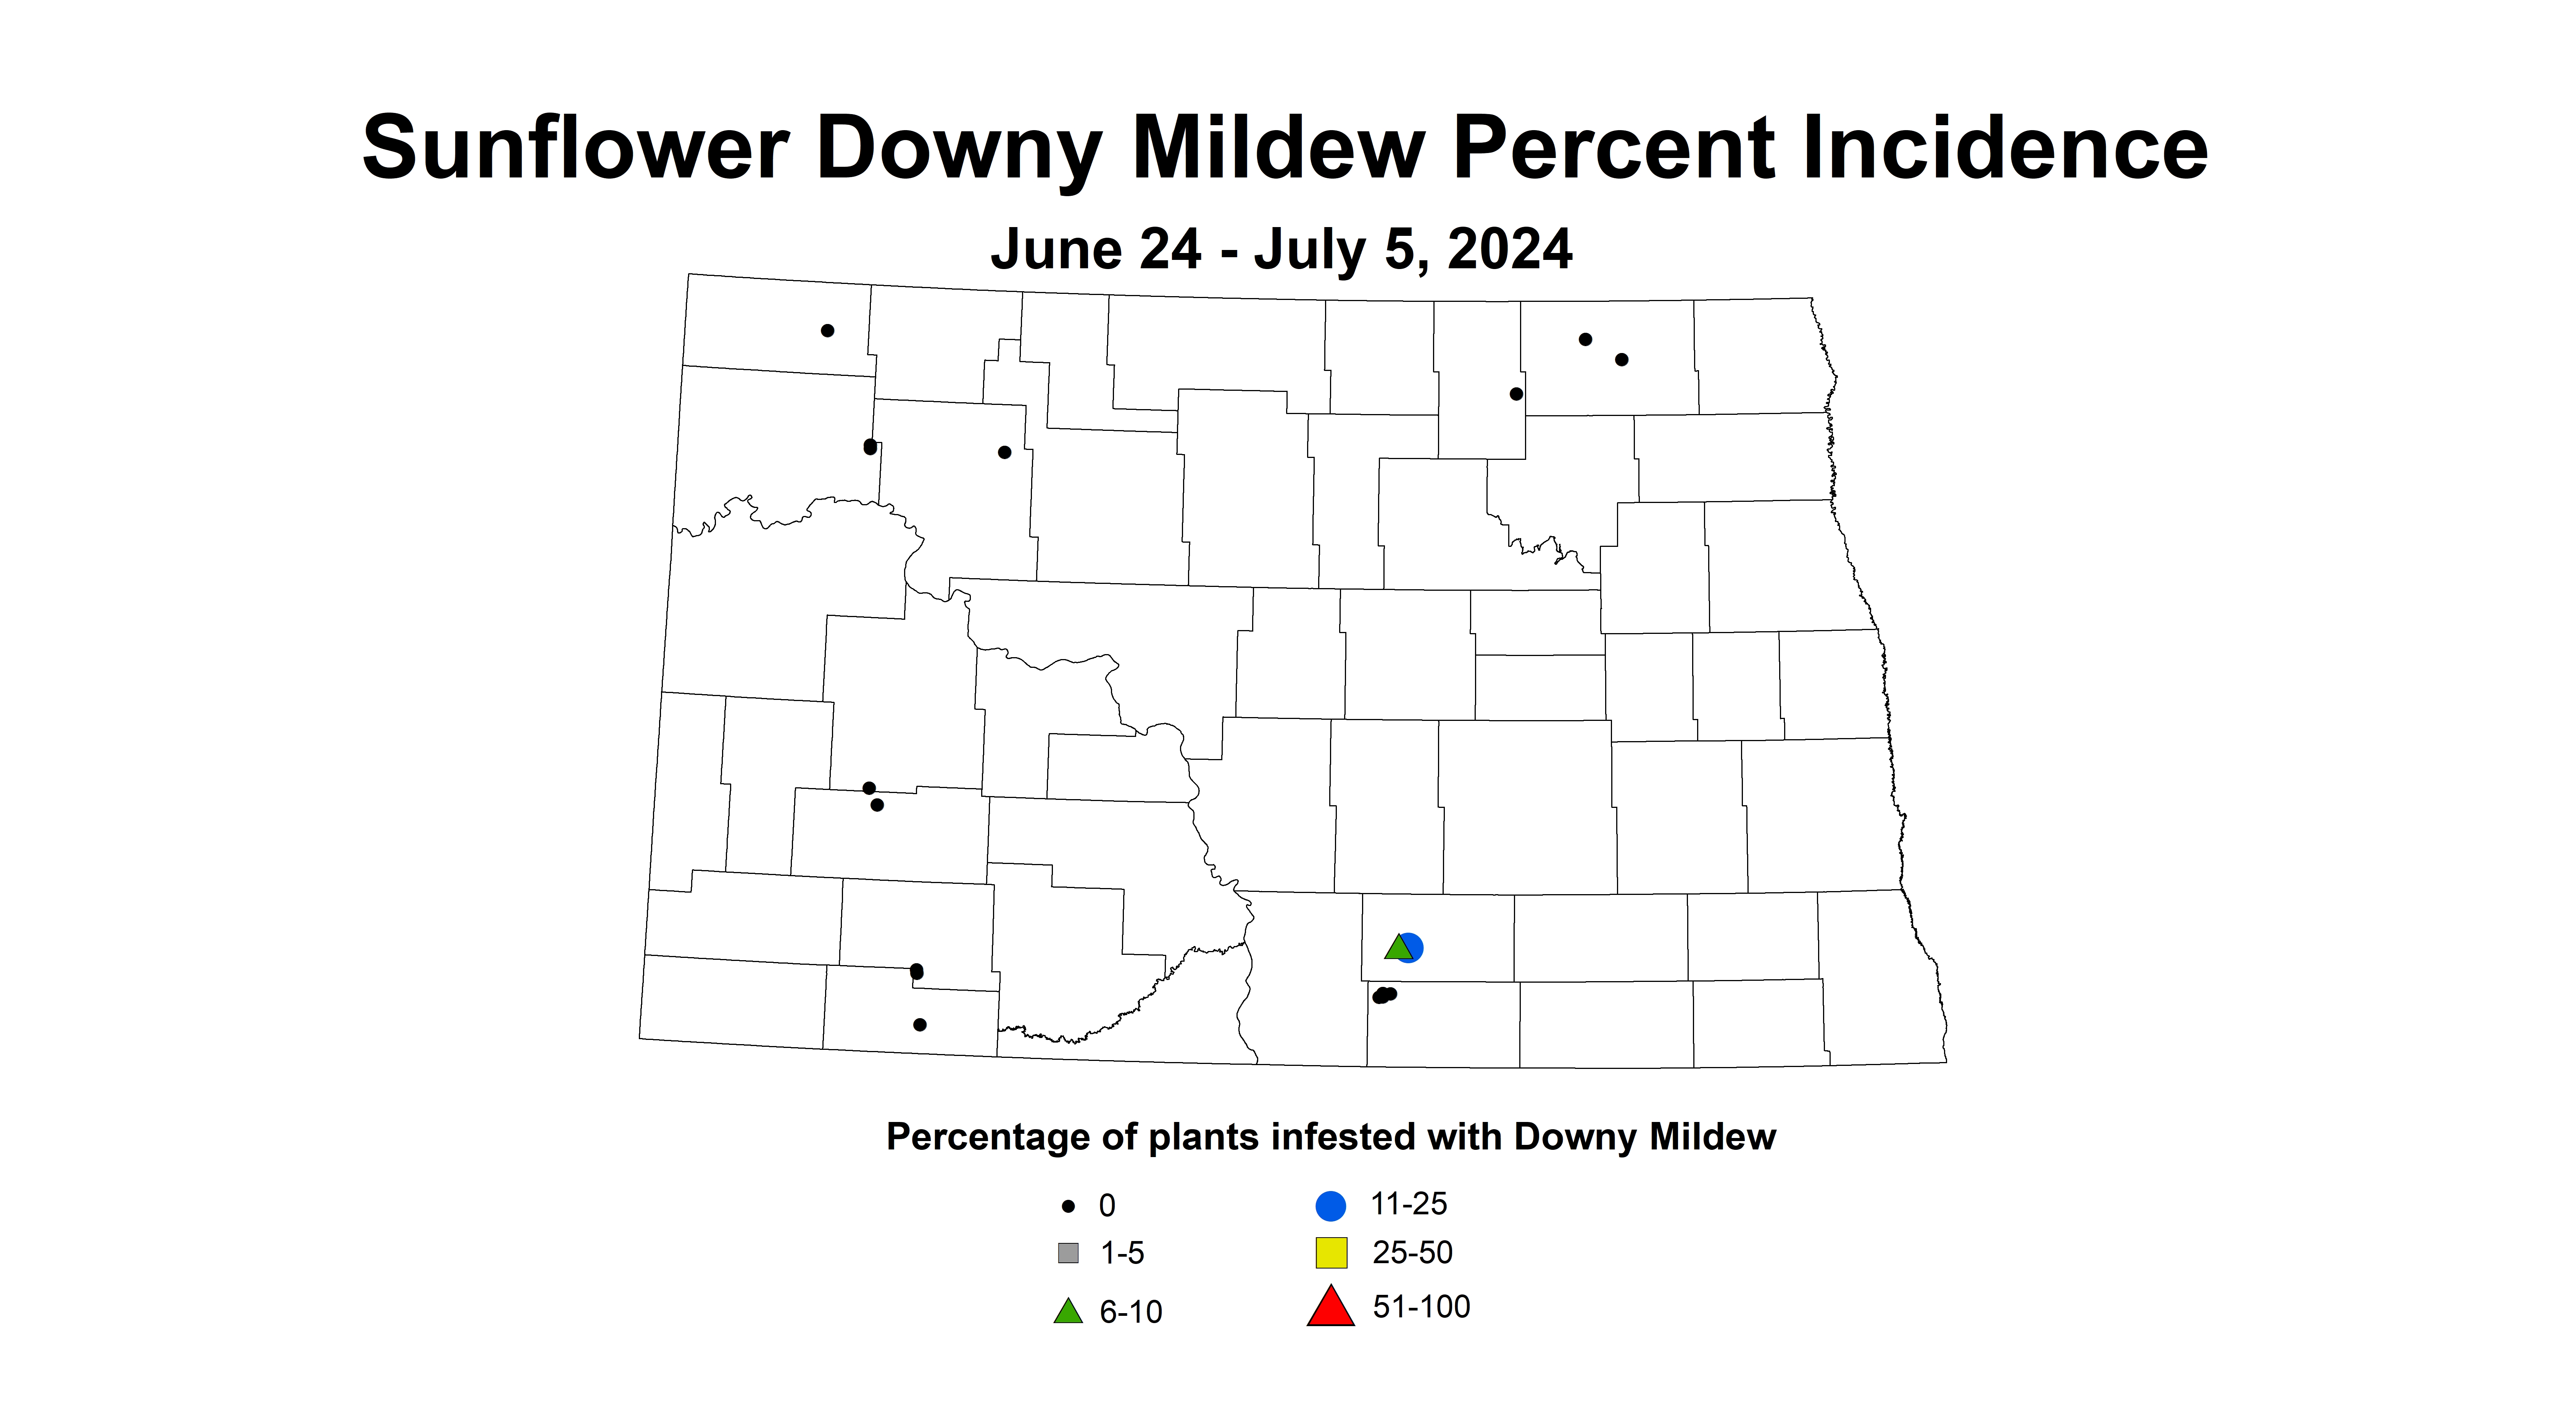 sunflower downy mildew incidence June 24 to July 5 2024